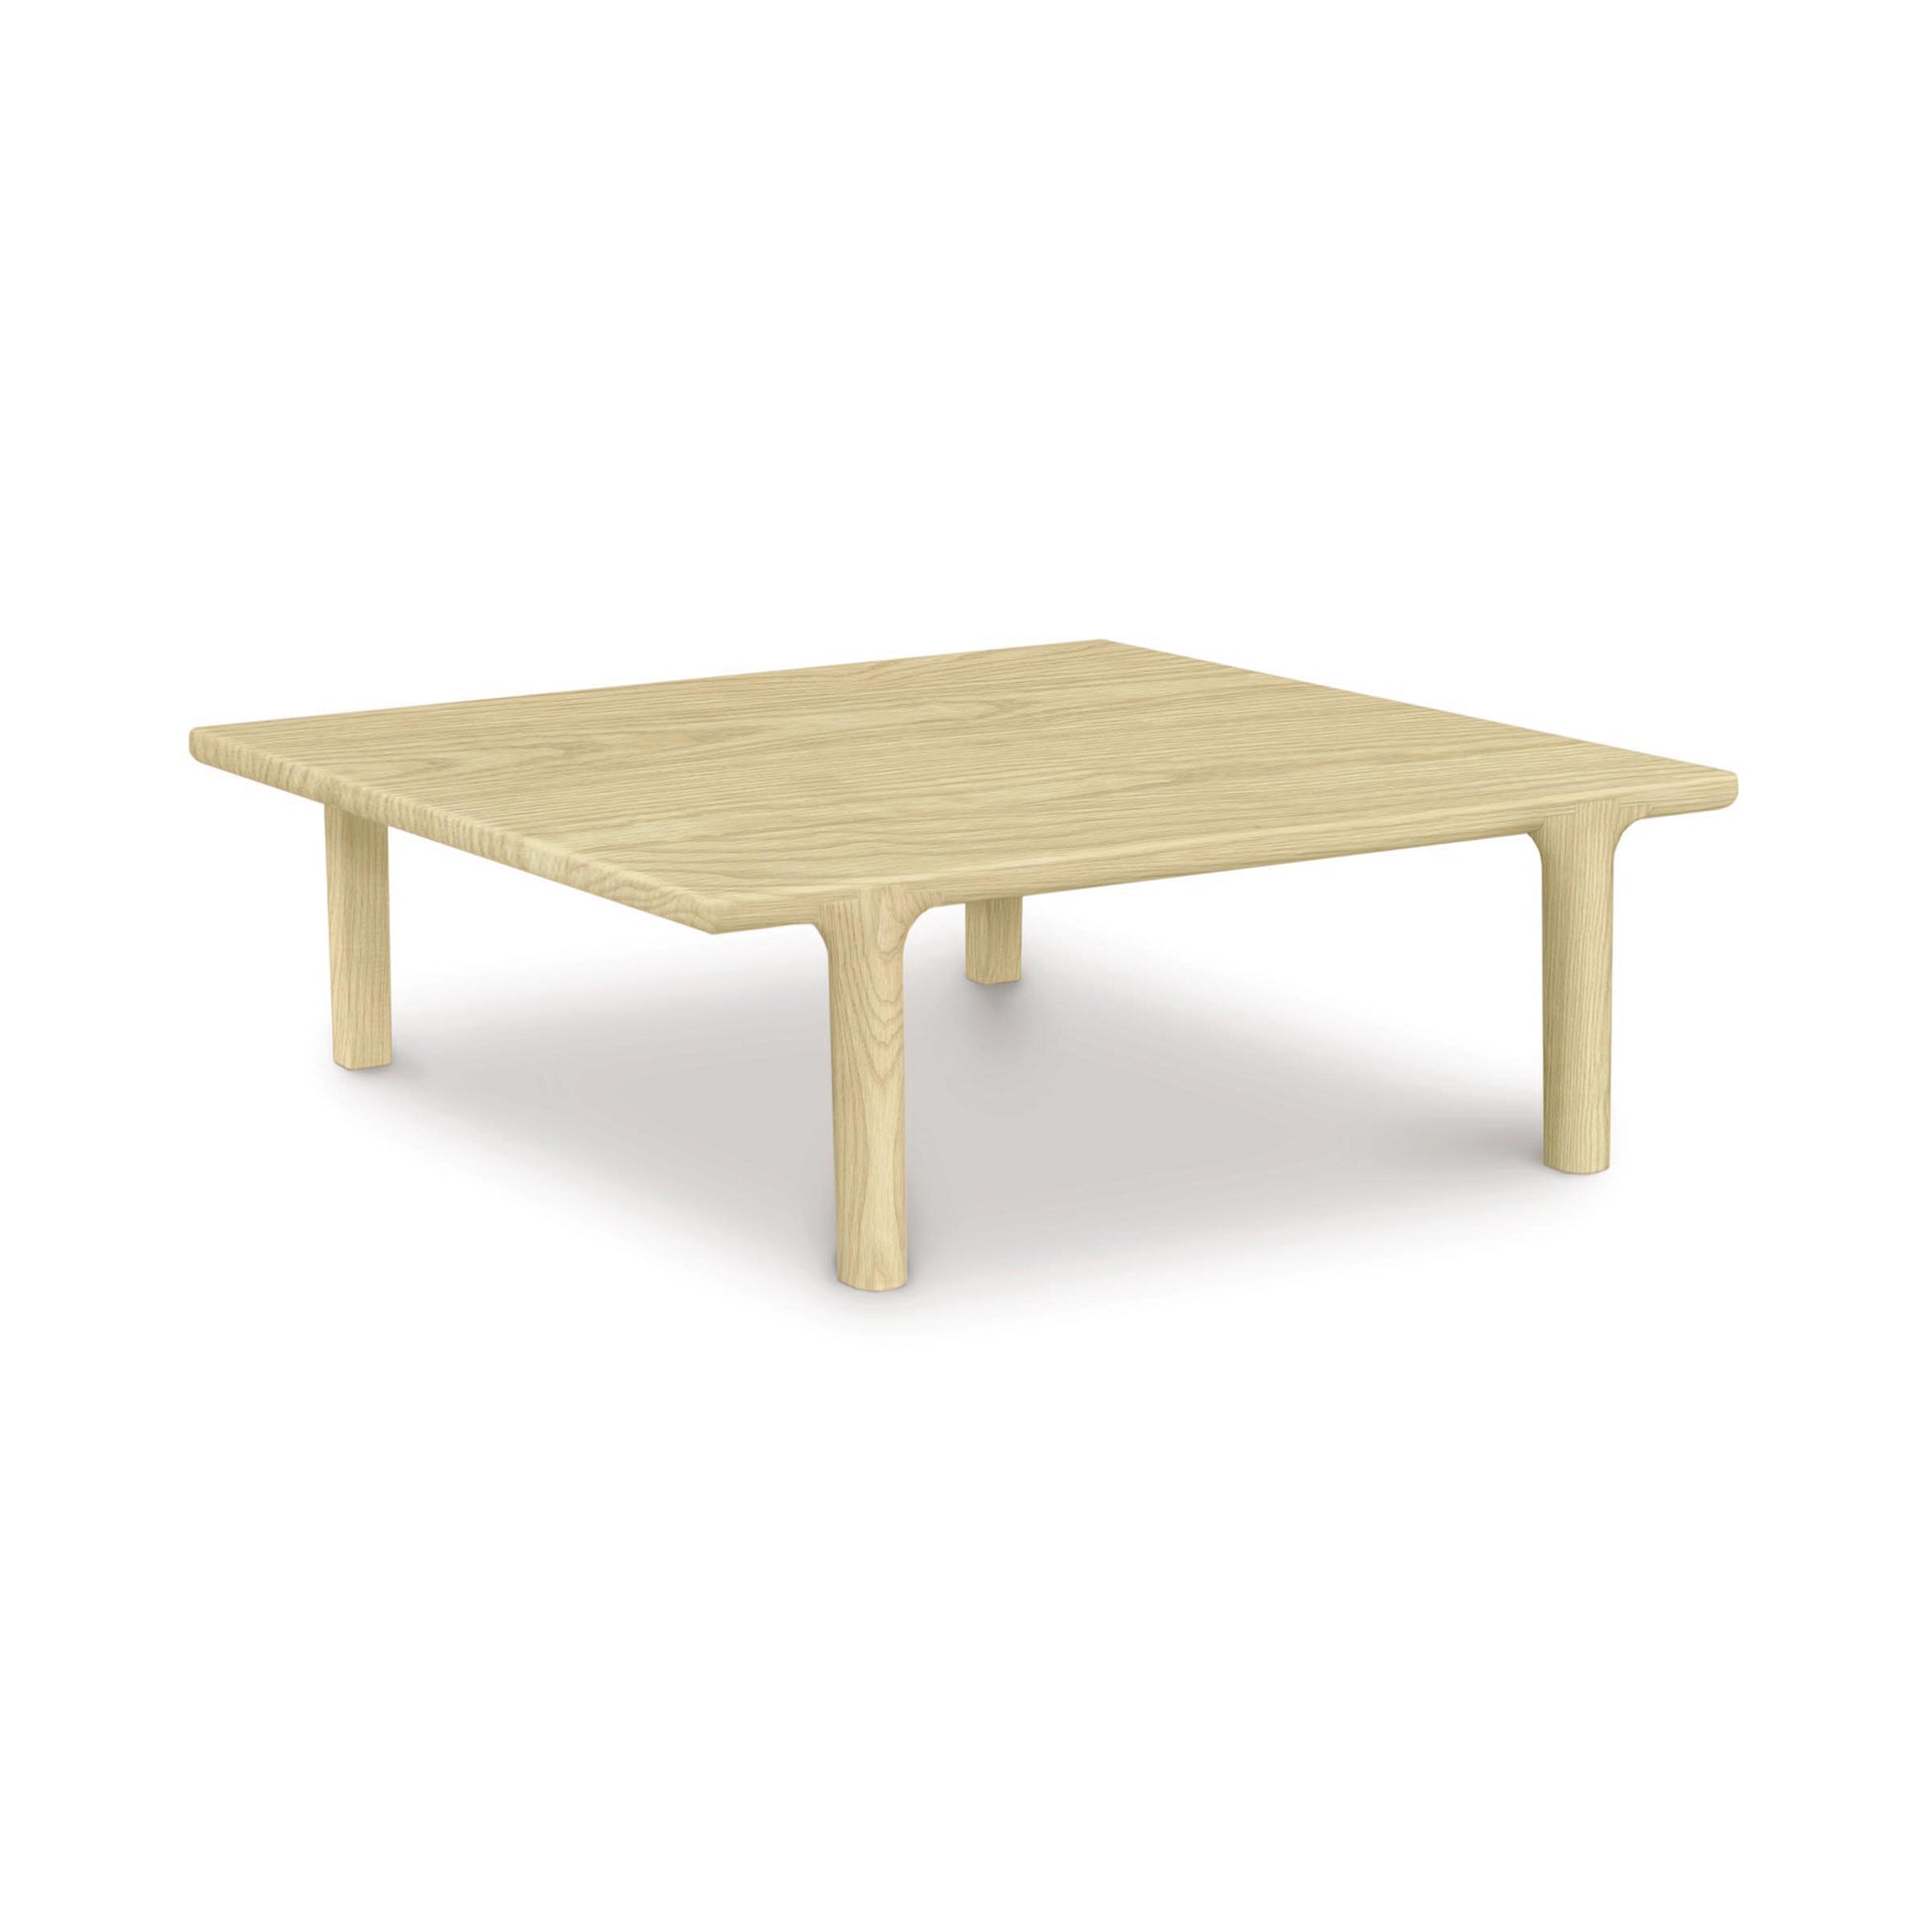 A simple Copeland Furniture Sierra Square Coffee Table made from North American hardwood on a white background.